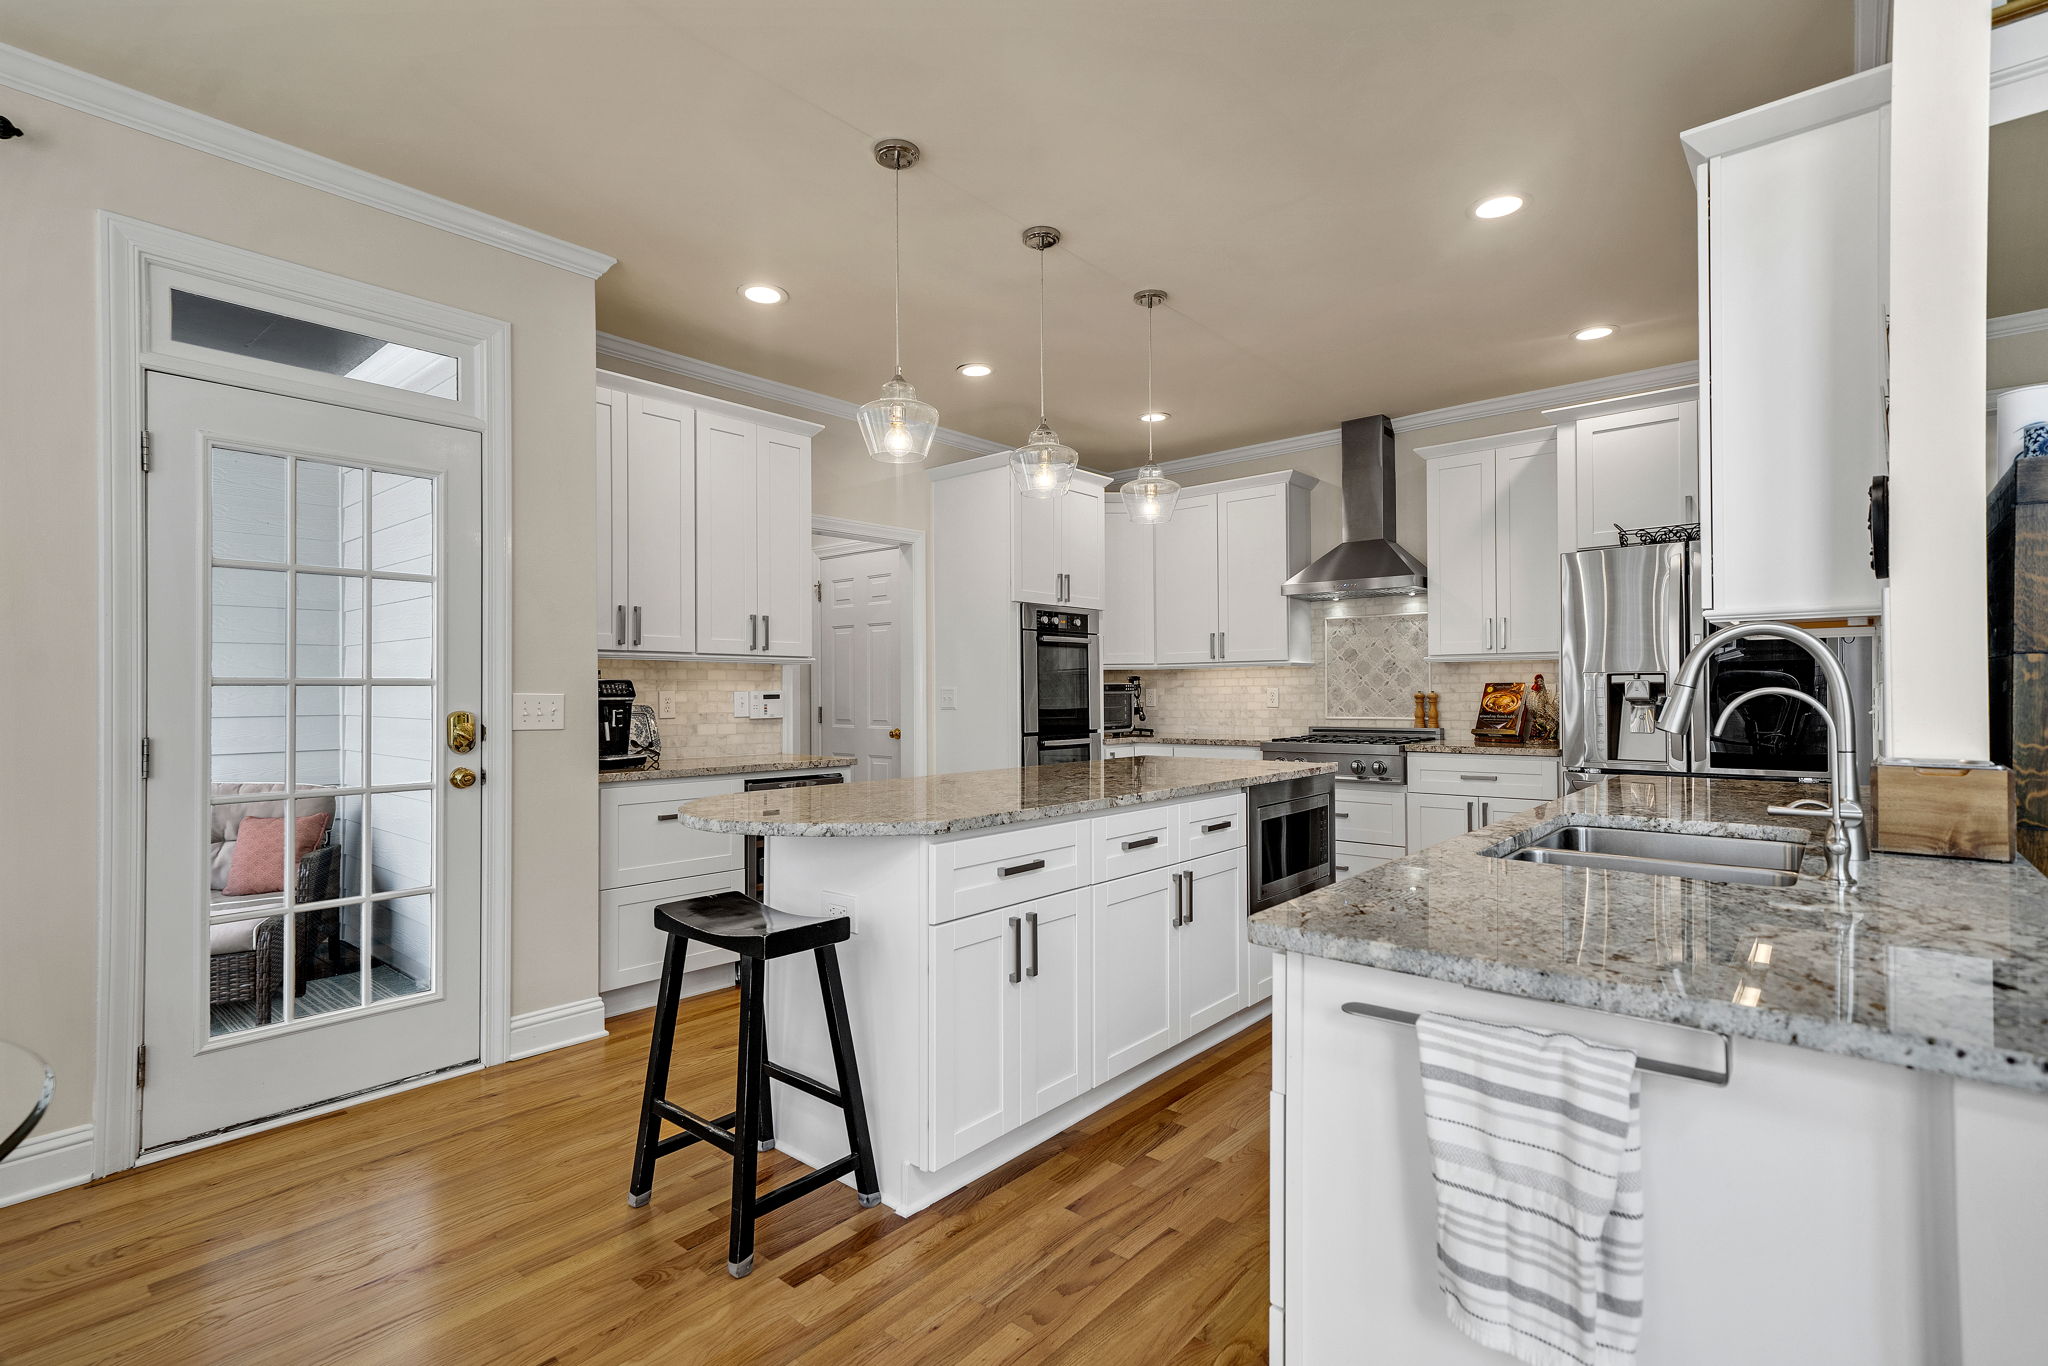 Beautifly renovated kitchen checks all your boxes!